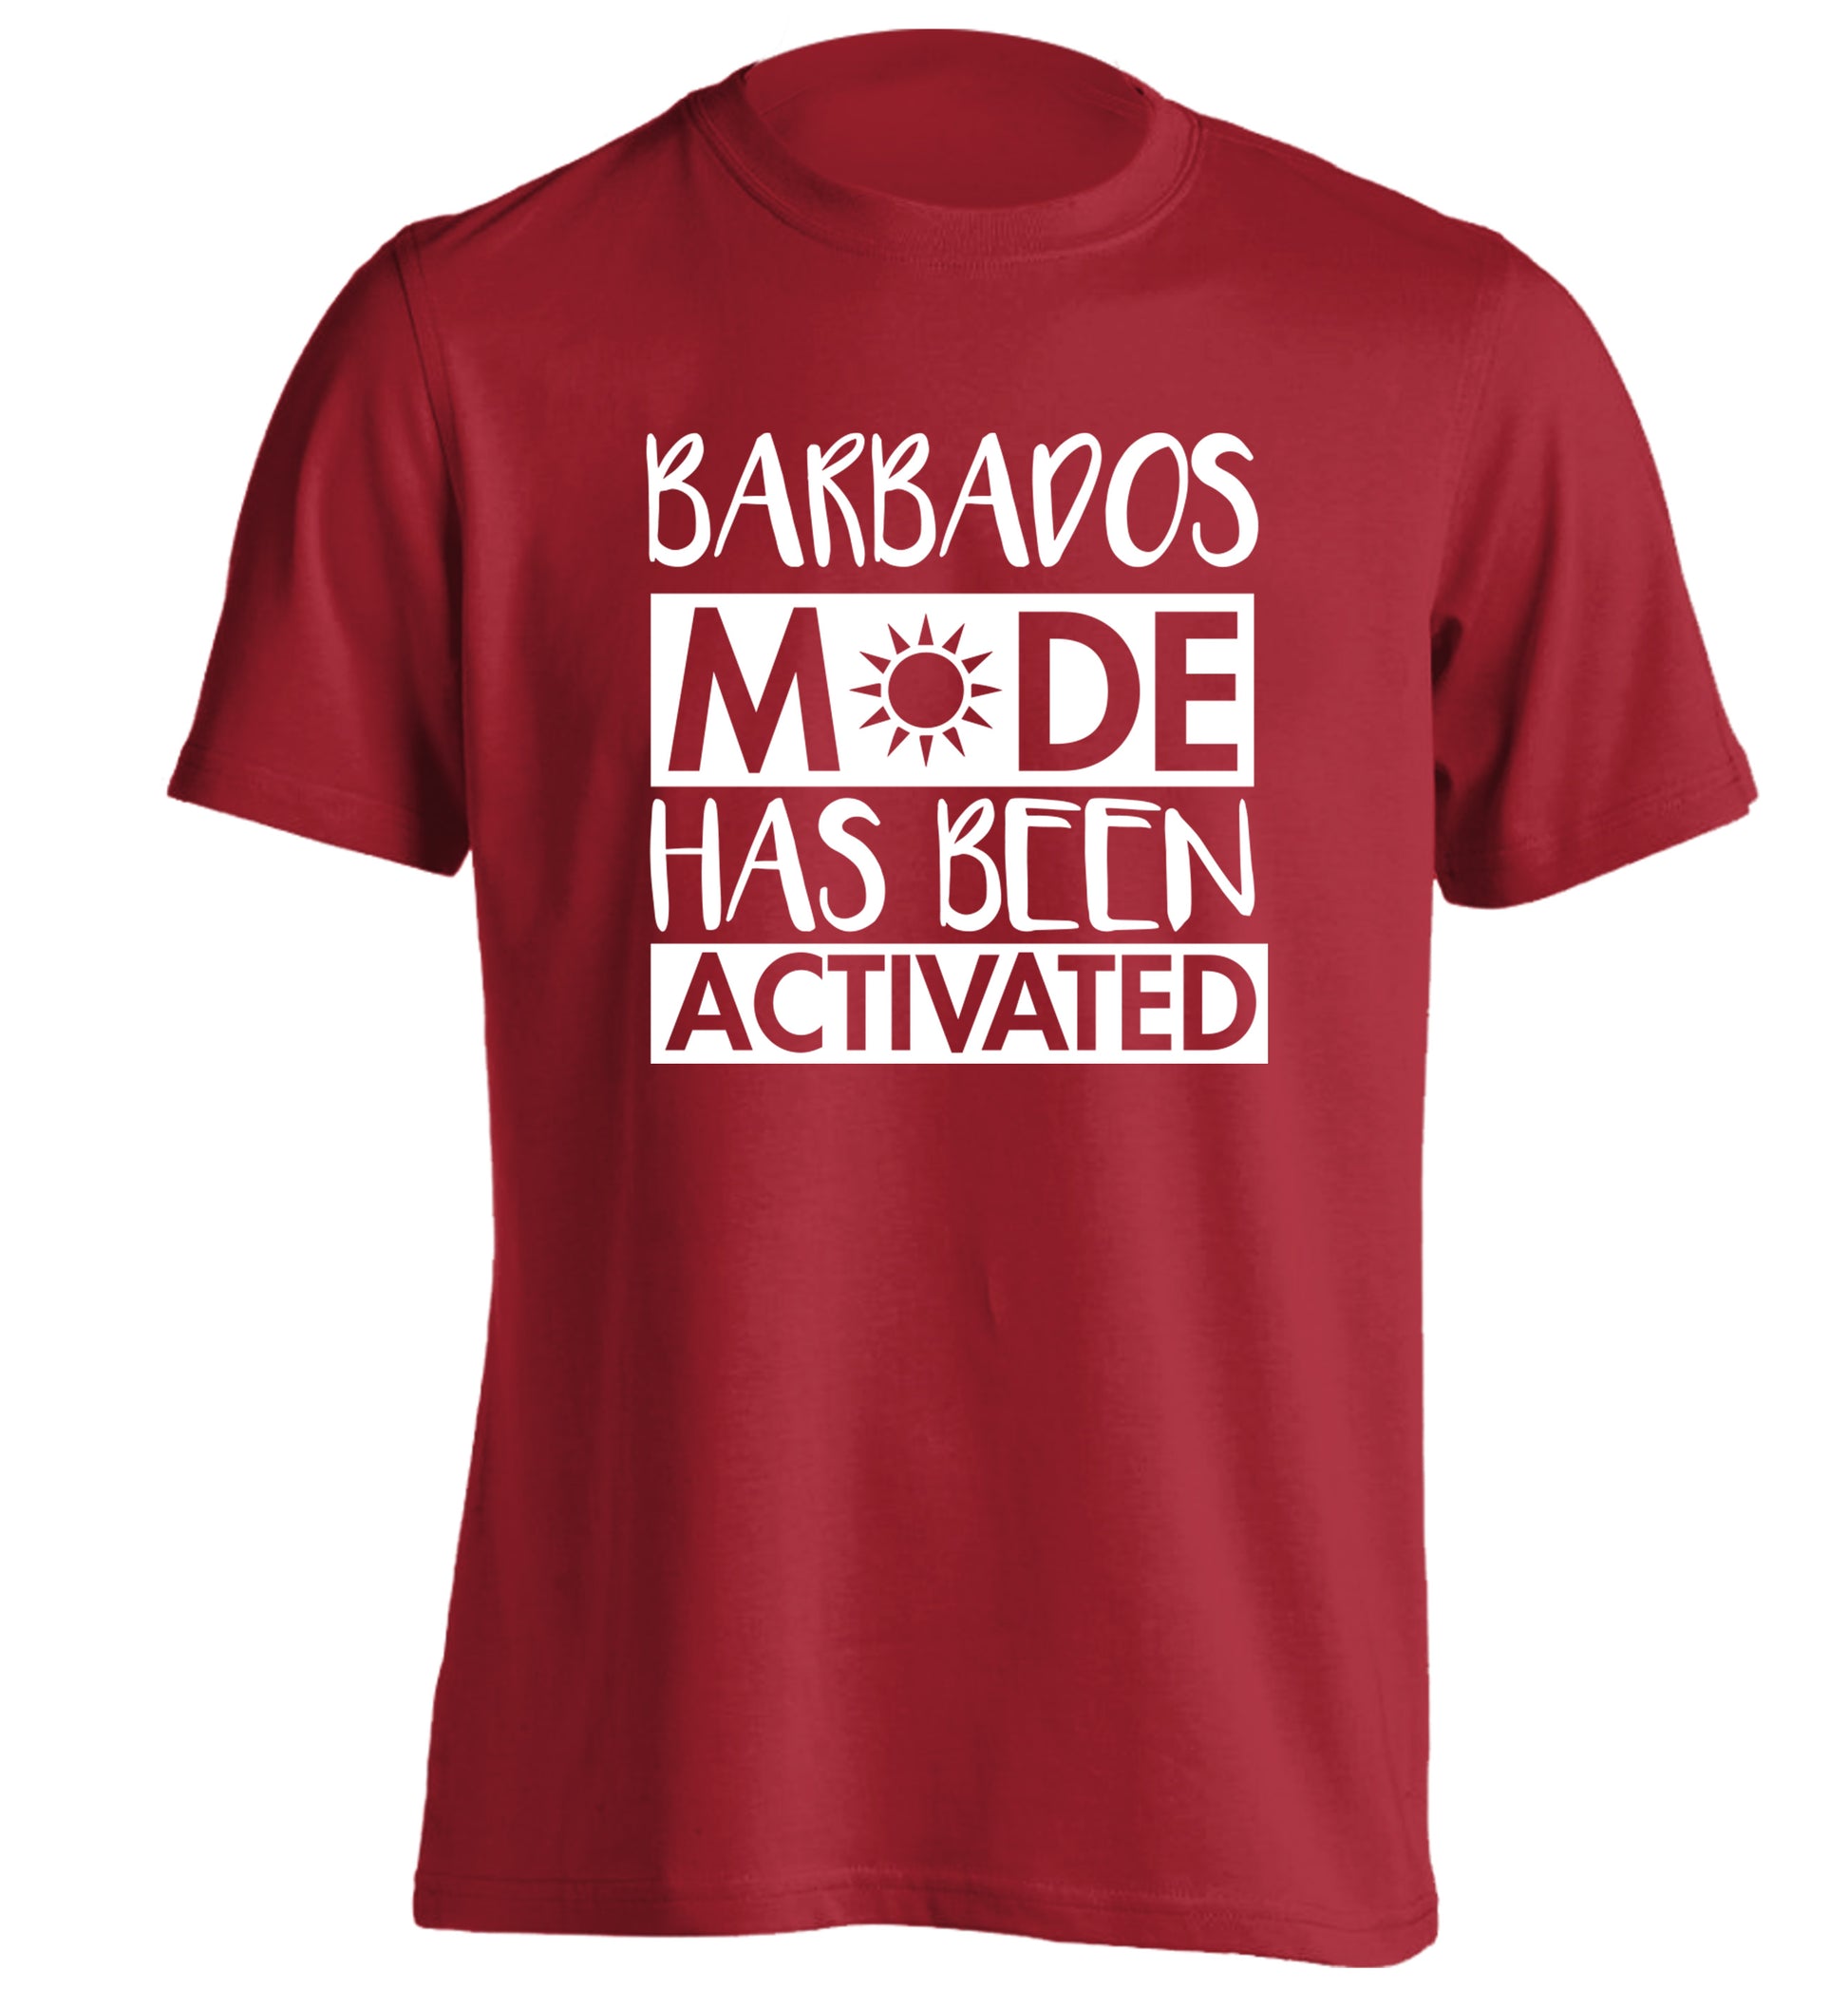 Barbados mode has been activated adults unisex red Tshirt 2XL